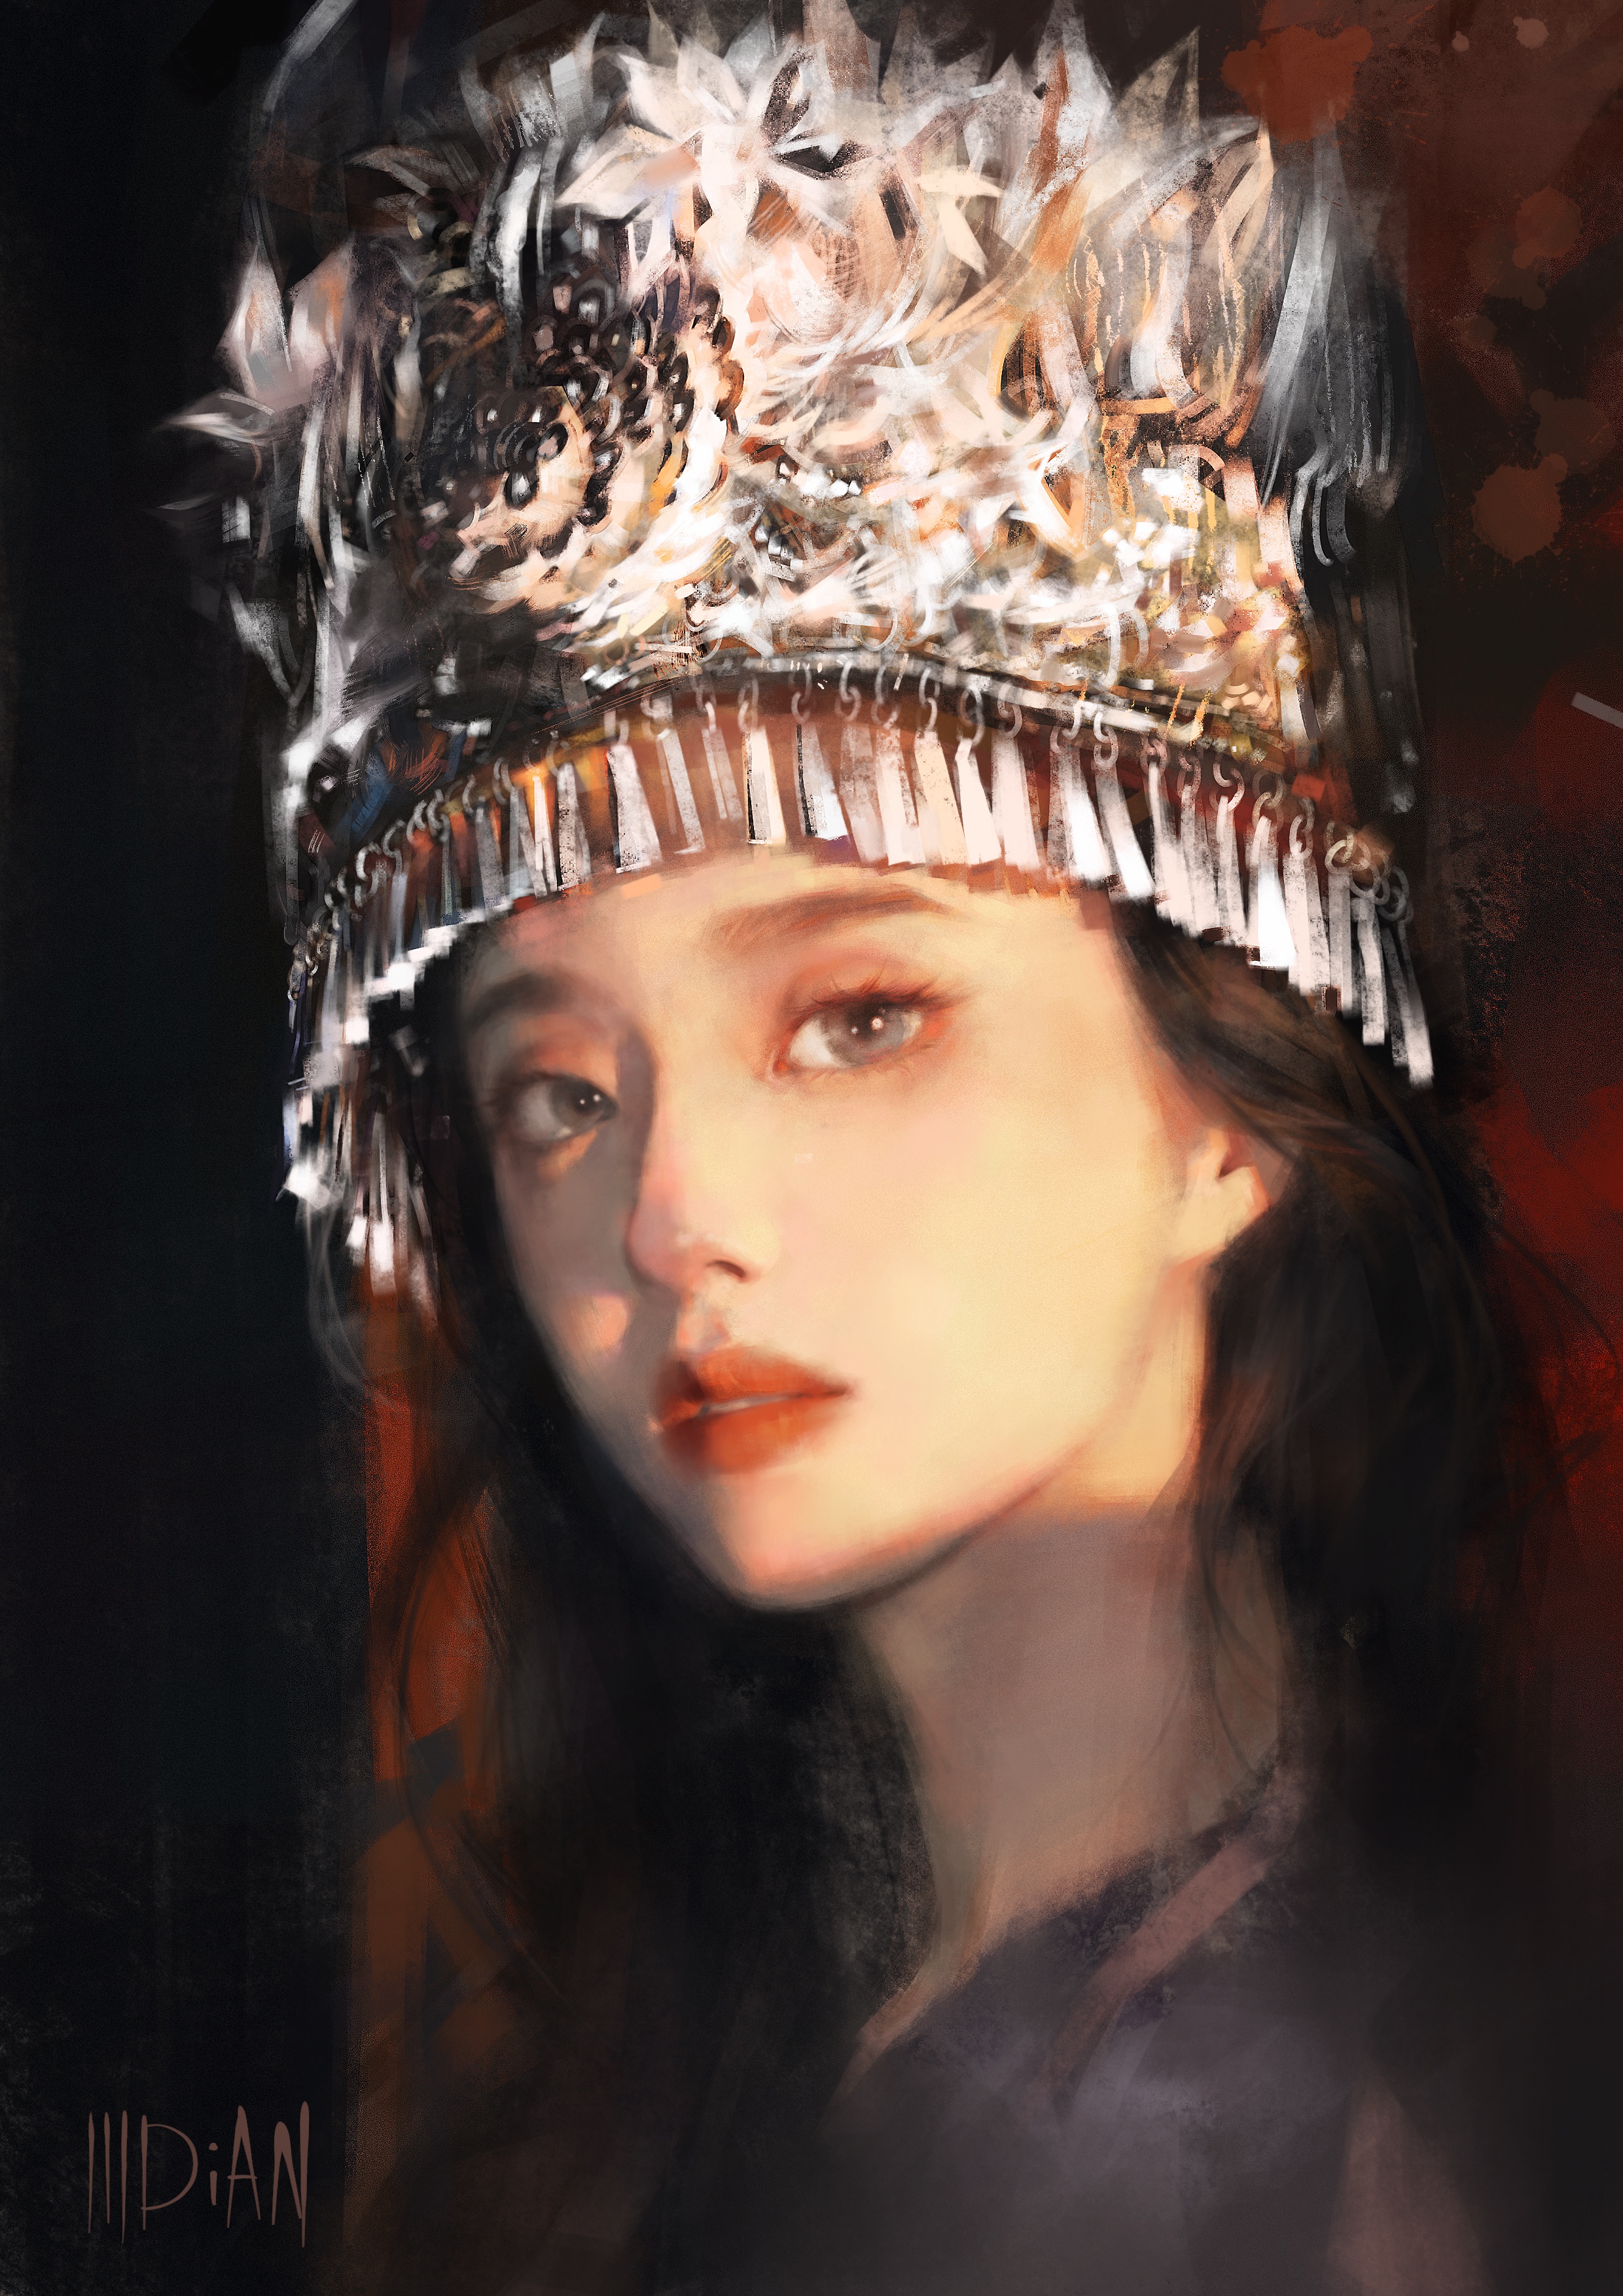 ILLDiAN Vertical Illustration Portrait Women Headdress Silver Jewelry Looking At Viewer Chinese Wome 2480x3508